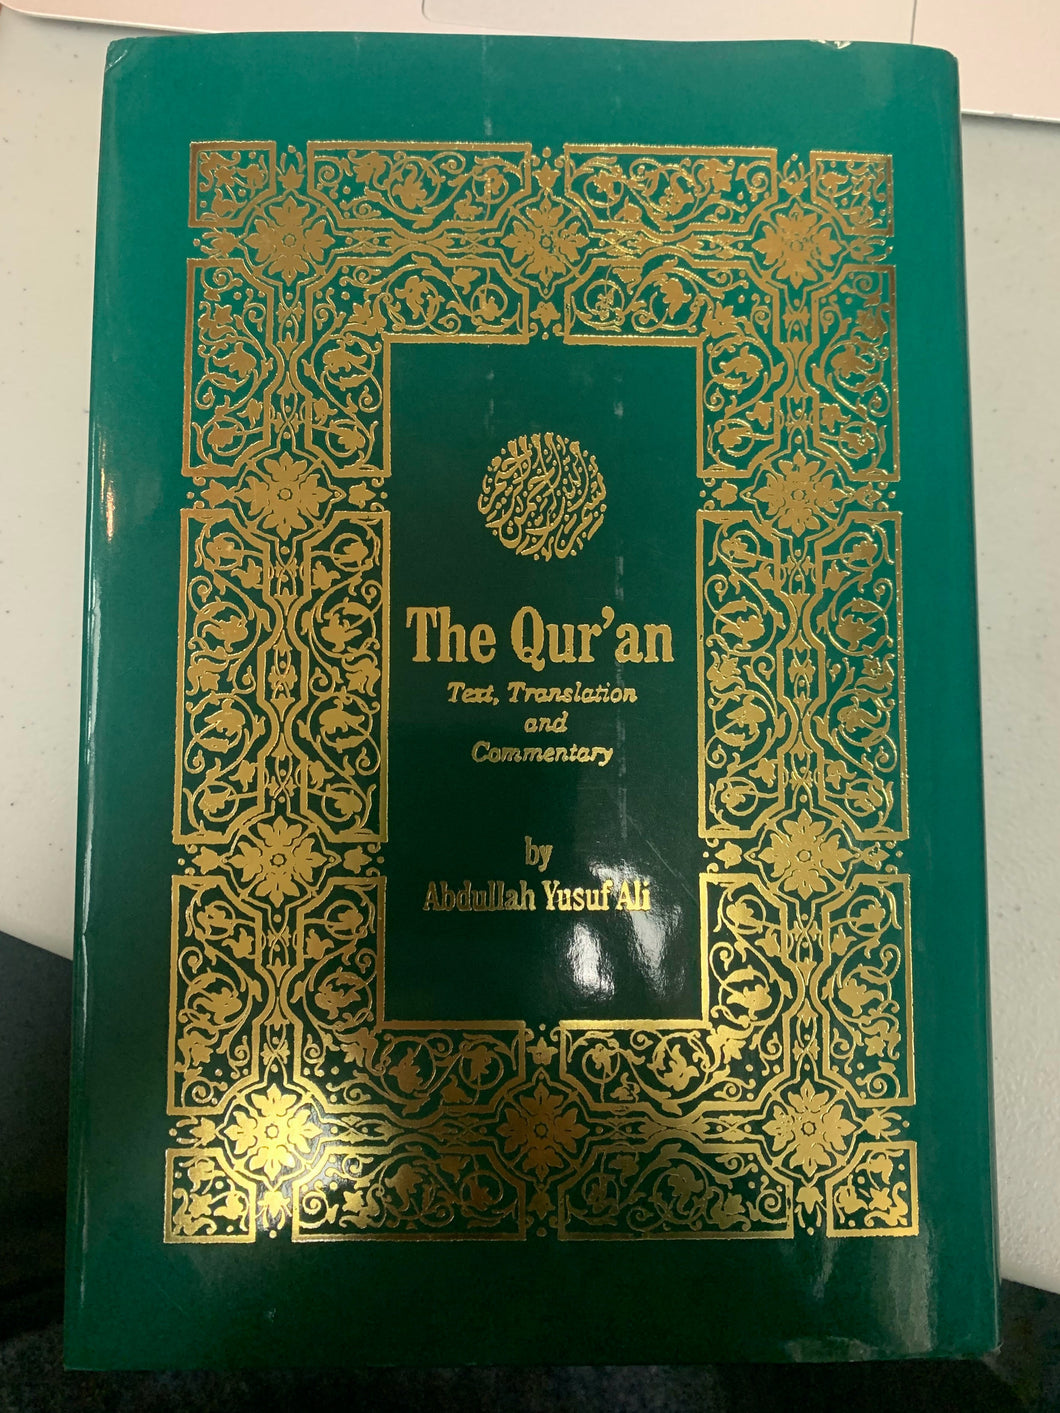 The Quran (text, translation and commentary)